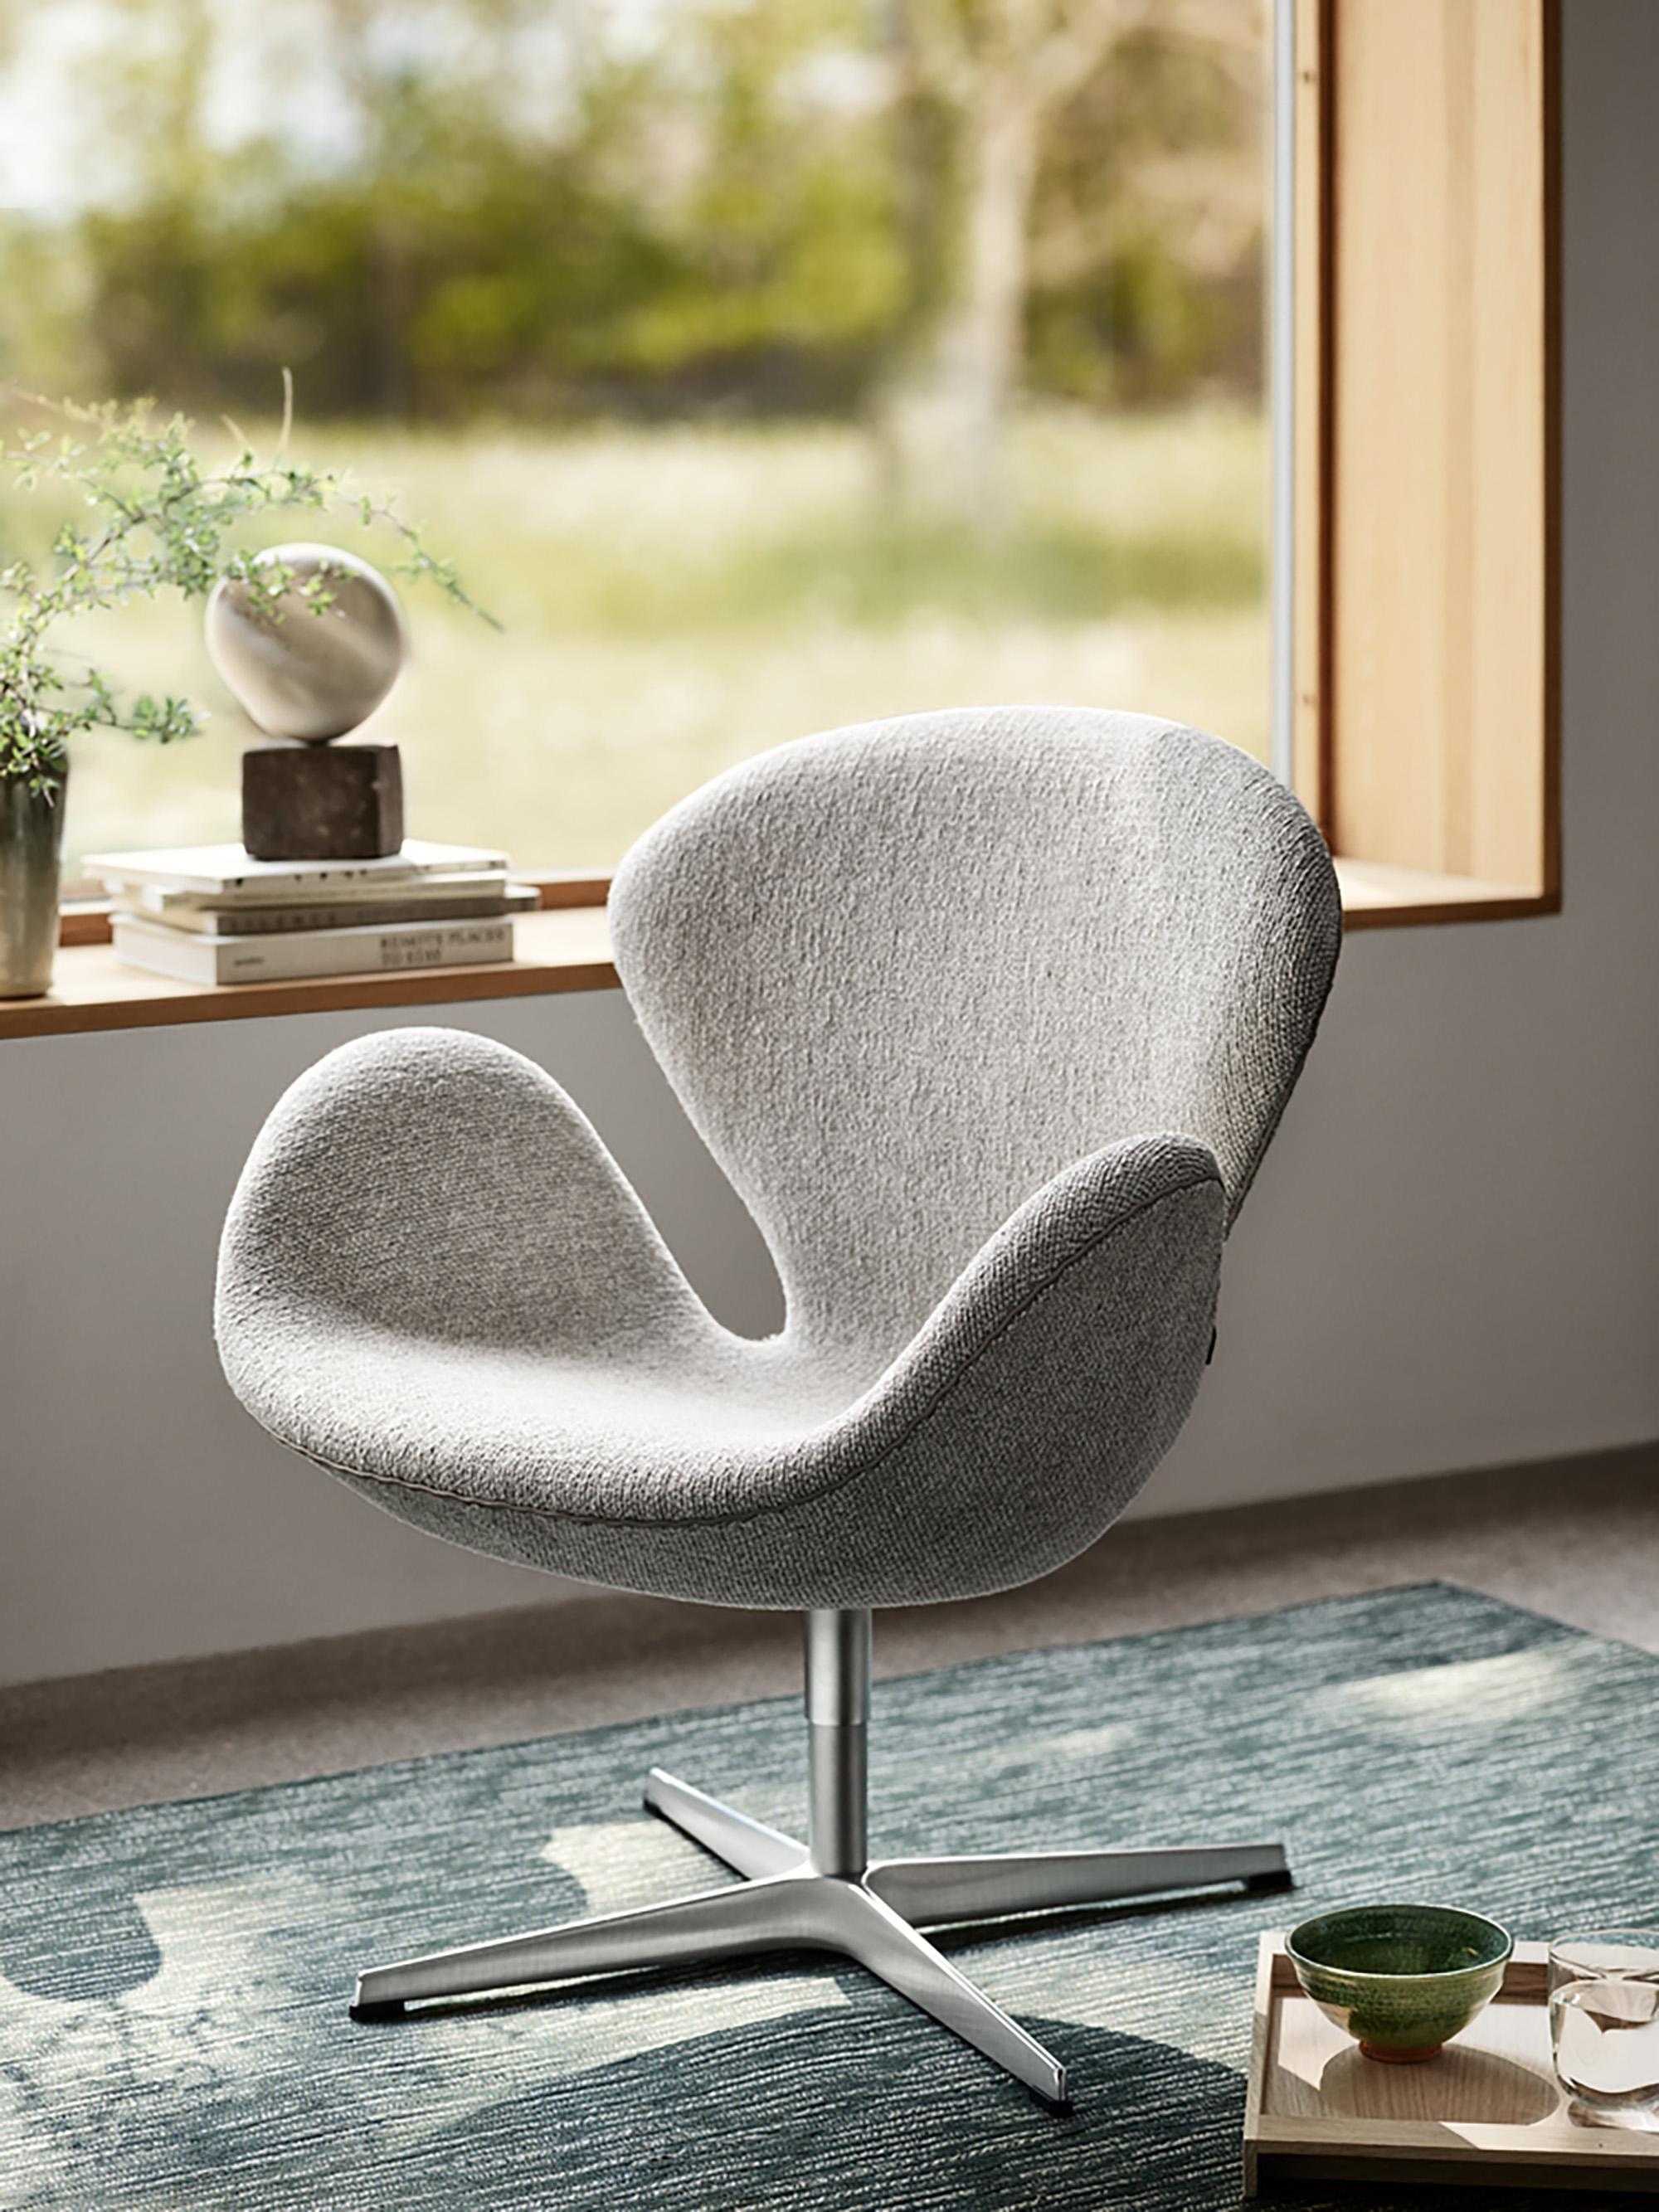 Arne Jacobsen 'Swan' Chair for Fritz Hansen in Fabric Upholstery (Cat. 1).

Established in 1872, Fritz Hansen has become synonymous with legendary Danish design. Combining timeless craftsmanship with an emphasis on sustainability, the brand’s